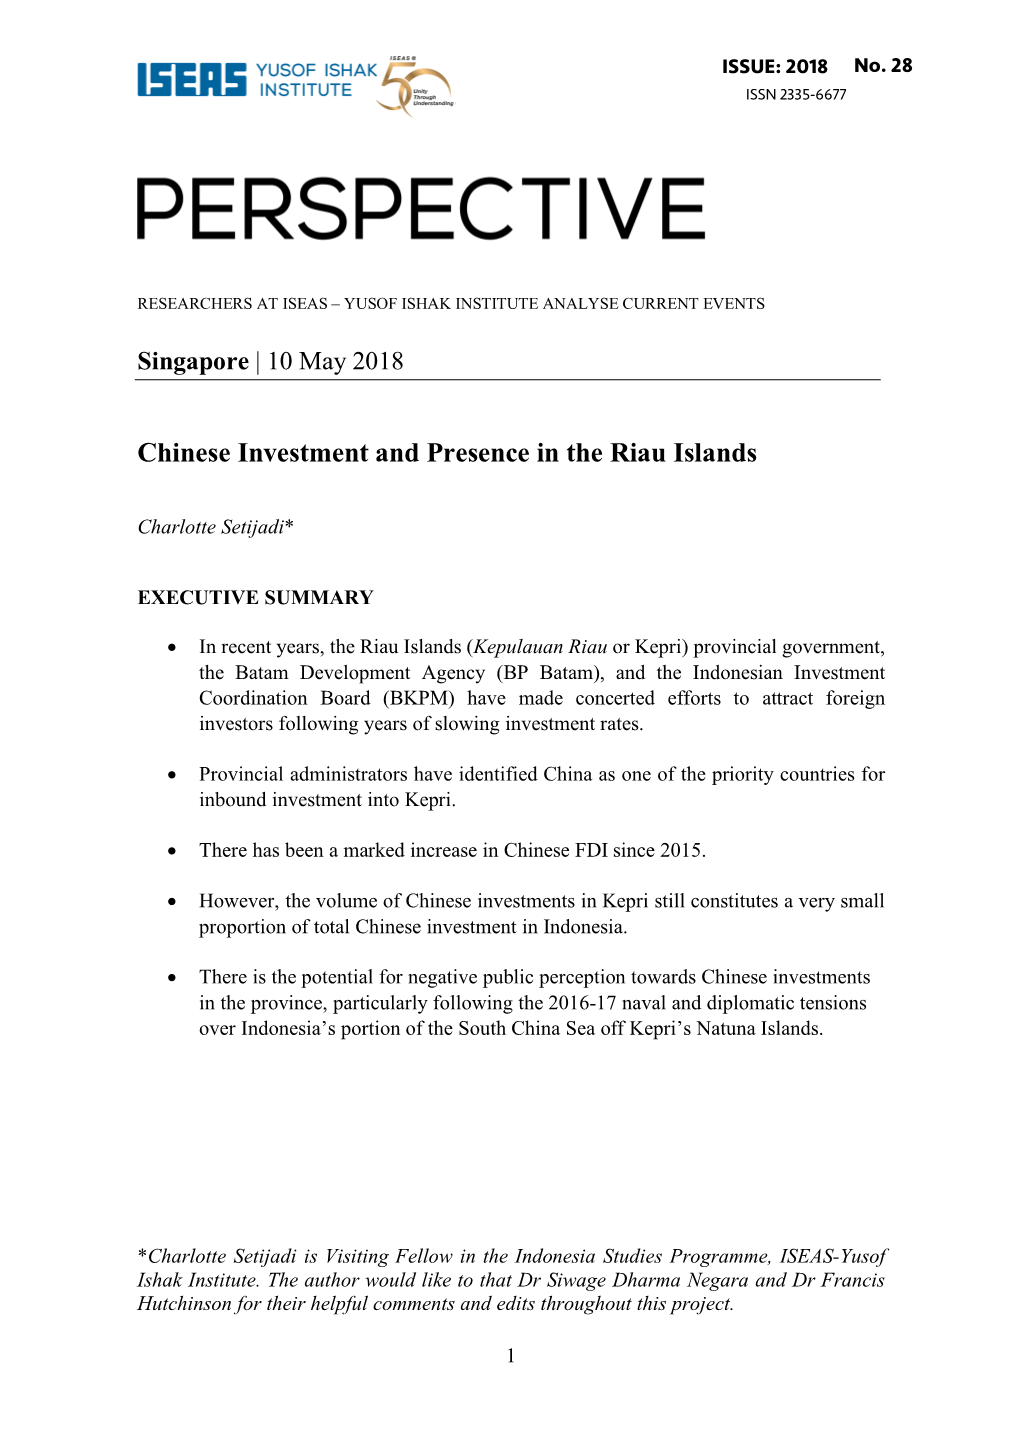 Chinese Investment and Presence in the Riau Islands